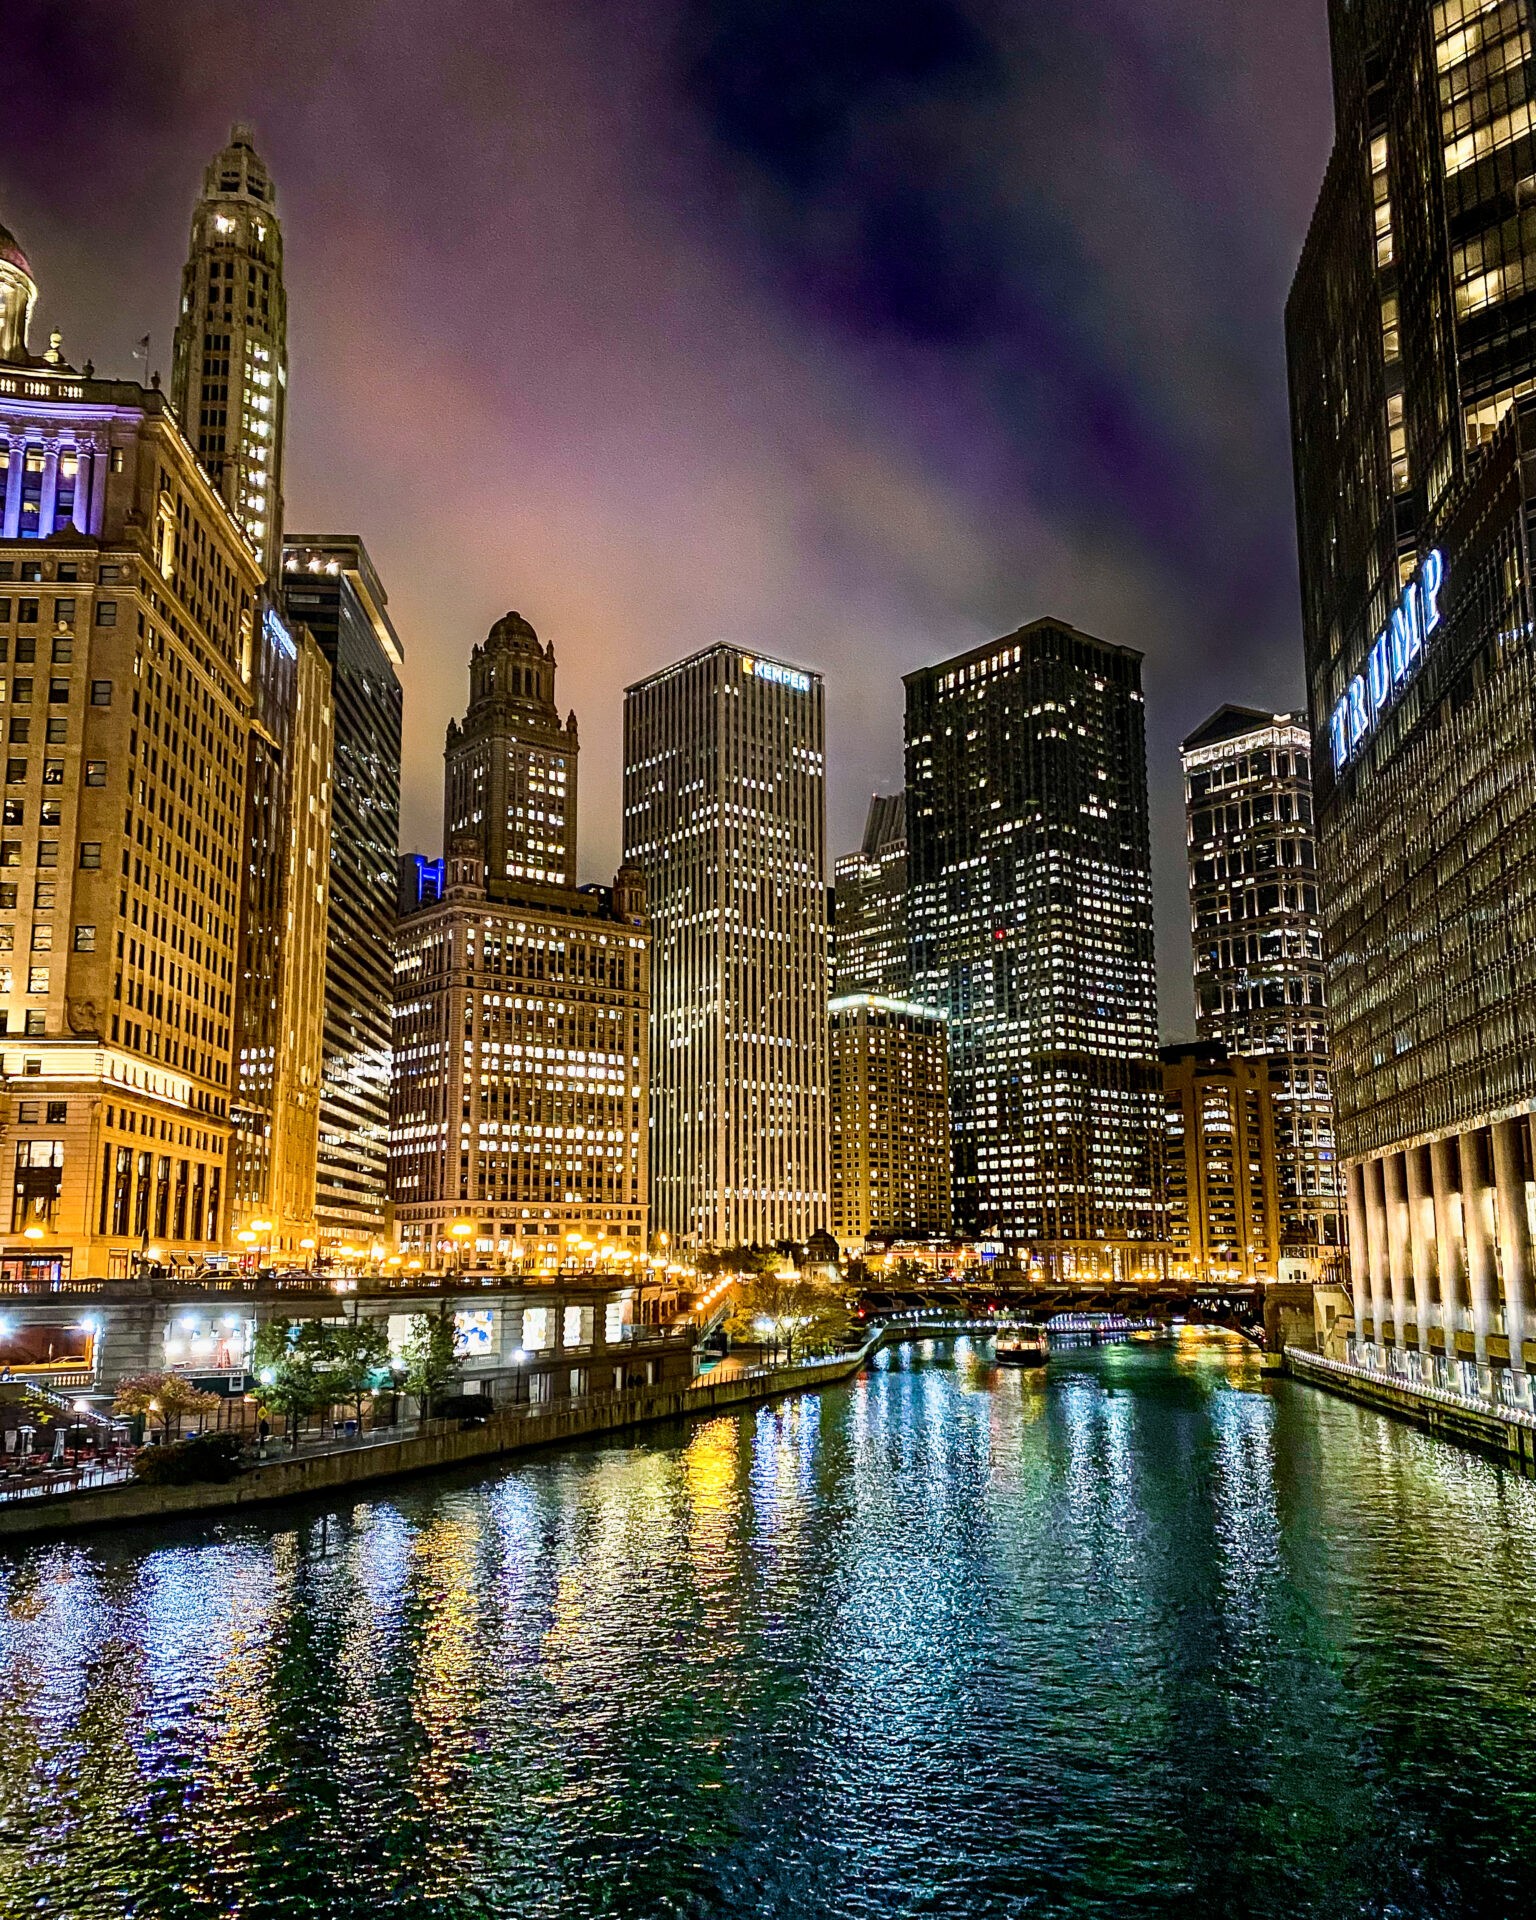 Nighttime city scape with lit skyscrapers on the river in Chicago Illinois